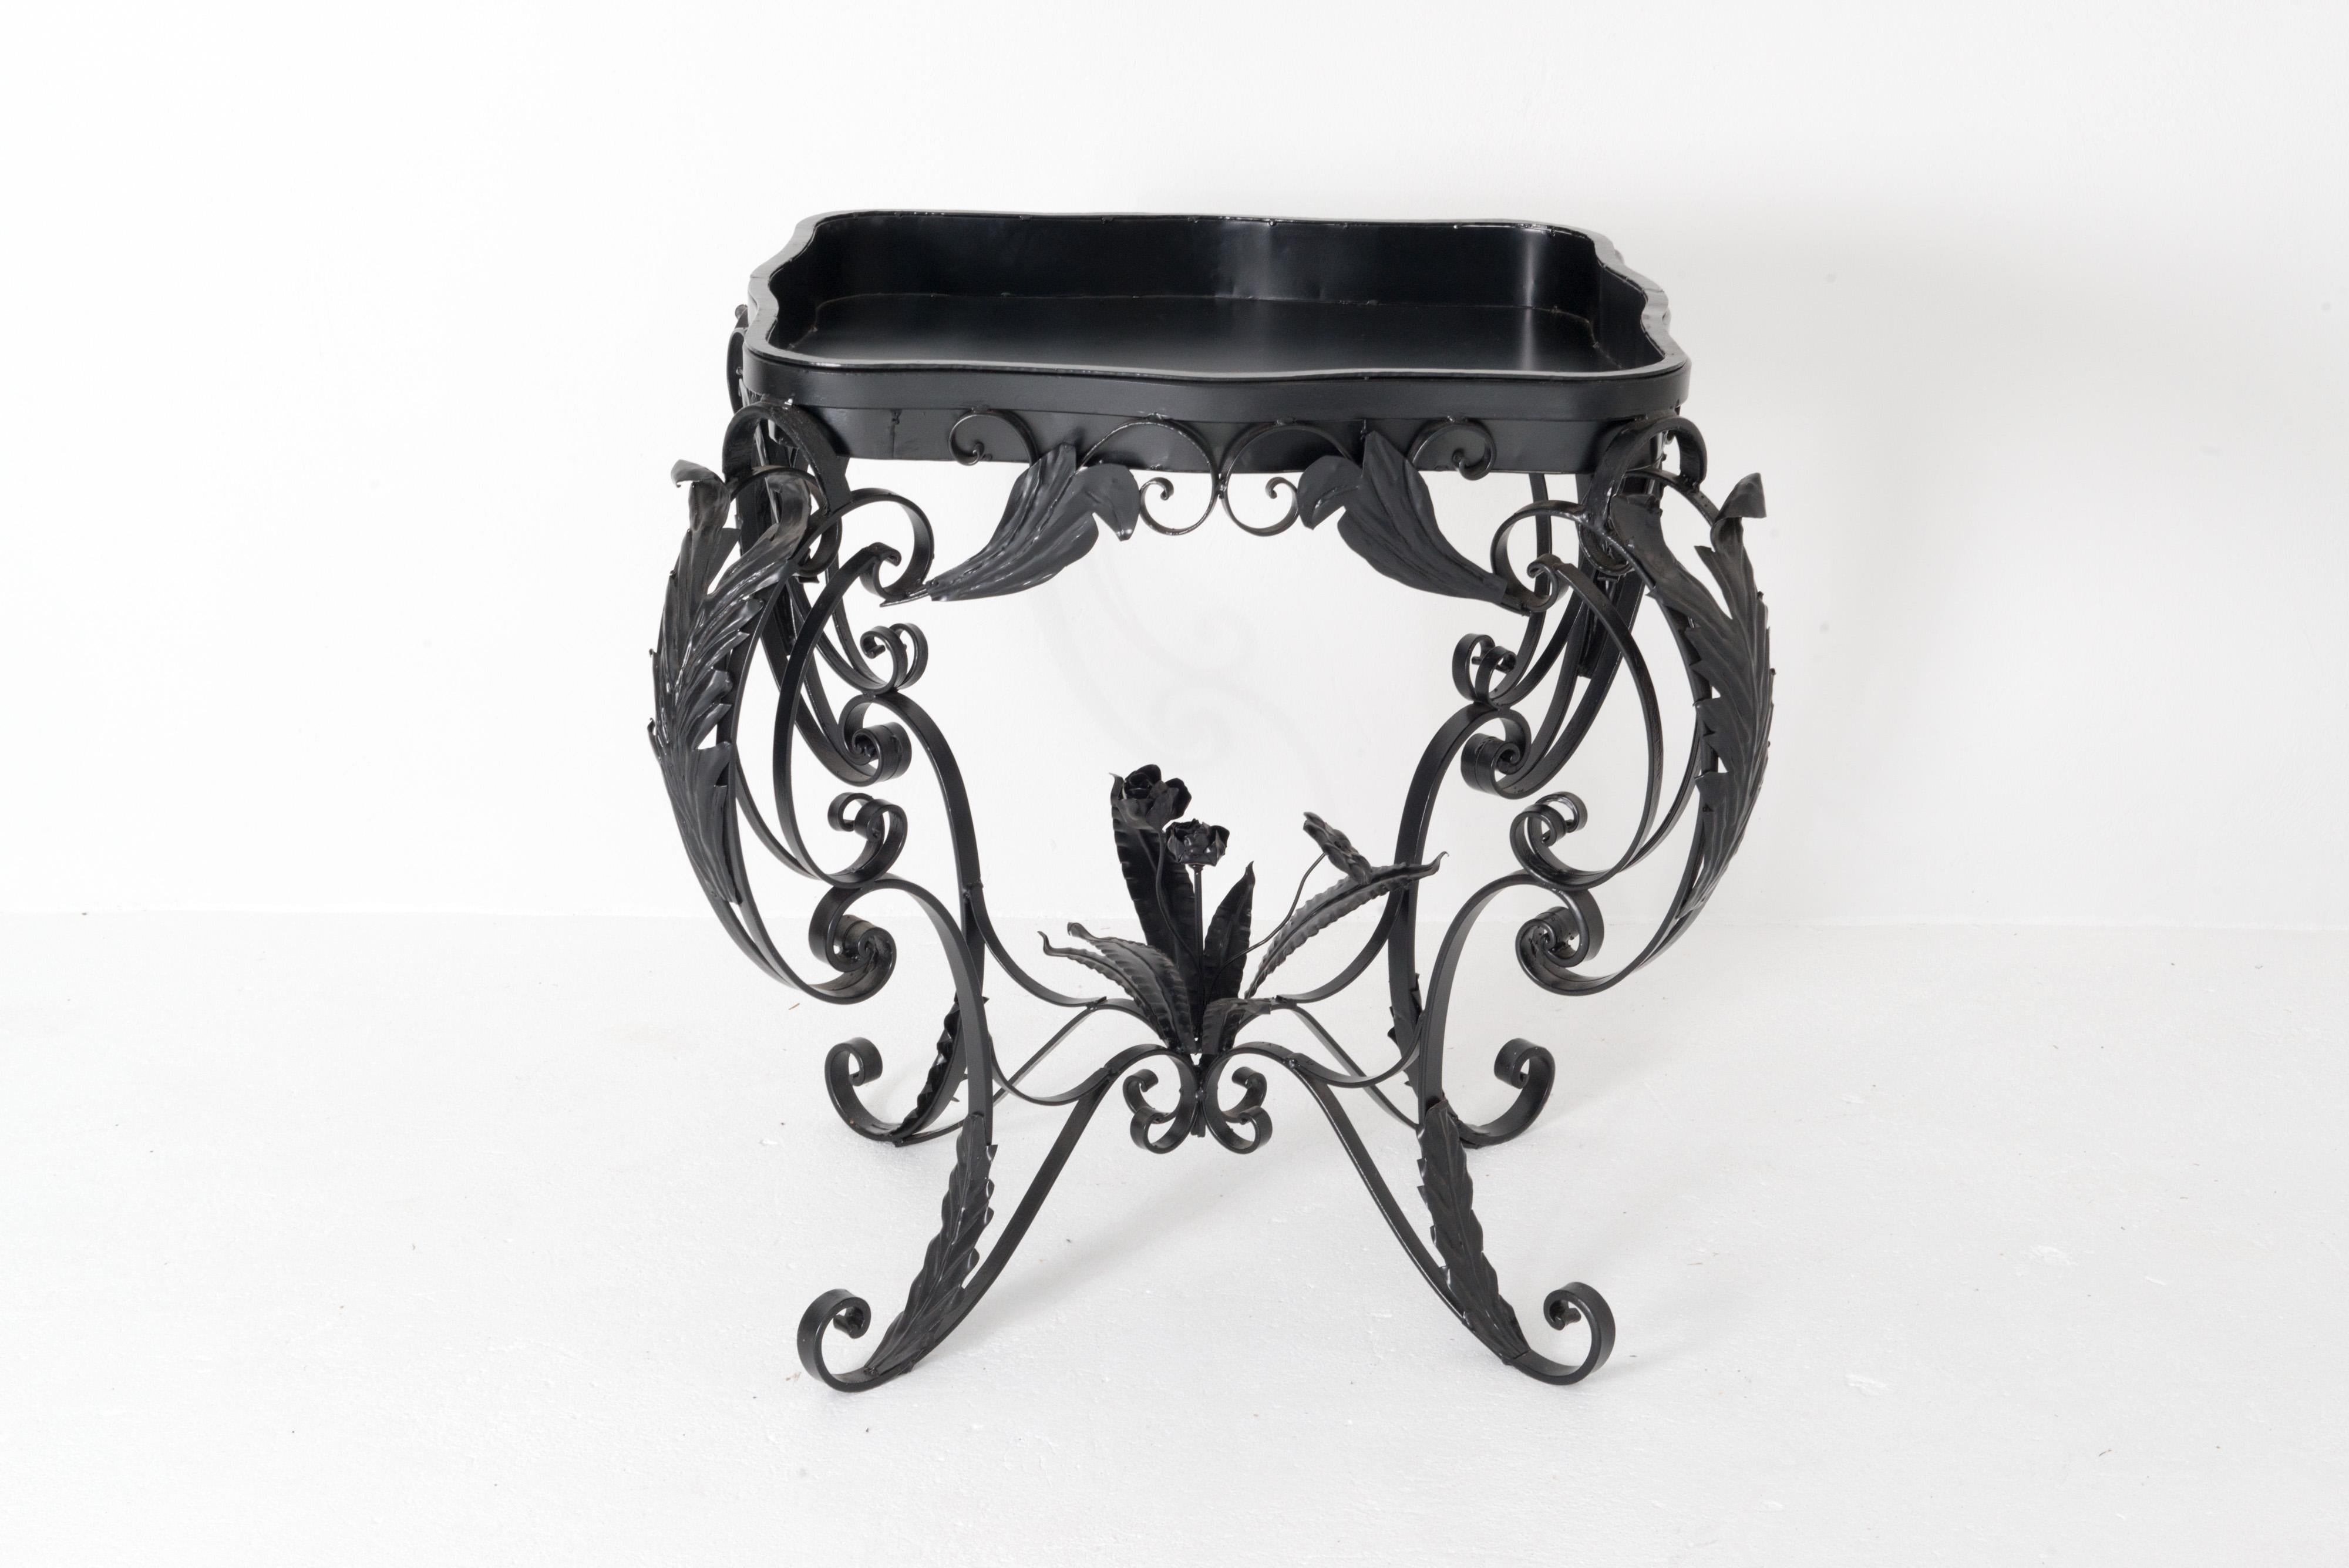 Foliate French wrought iron planter with inset tray. Corners are embellished with curving iron leaves. The four wrought iron stretchers converge in the center at a delicate wrought iron bouquet of flowers. An unusual antique piece in excellent